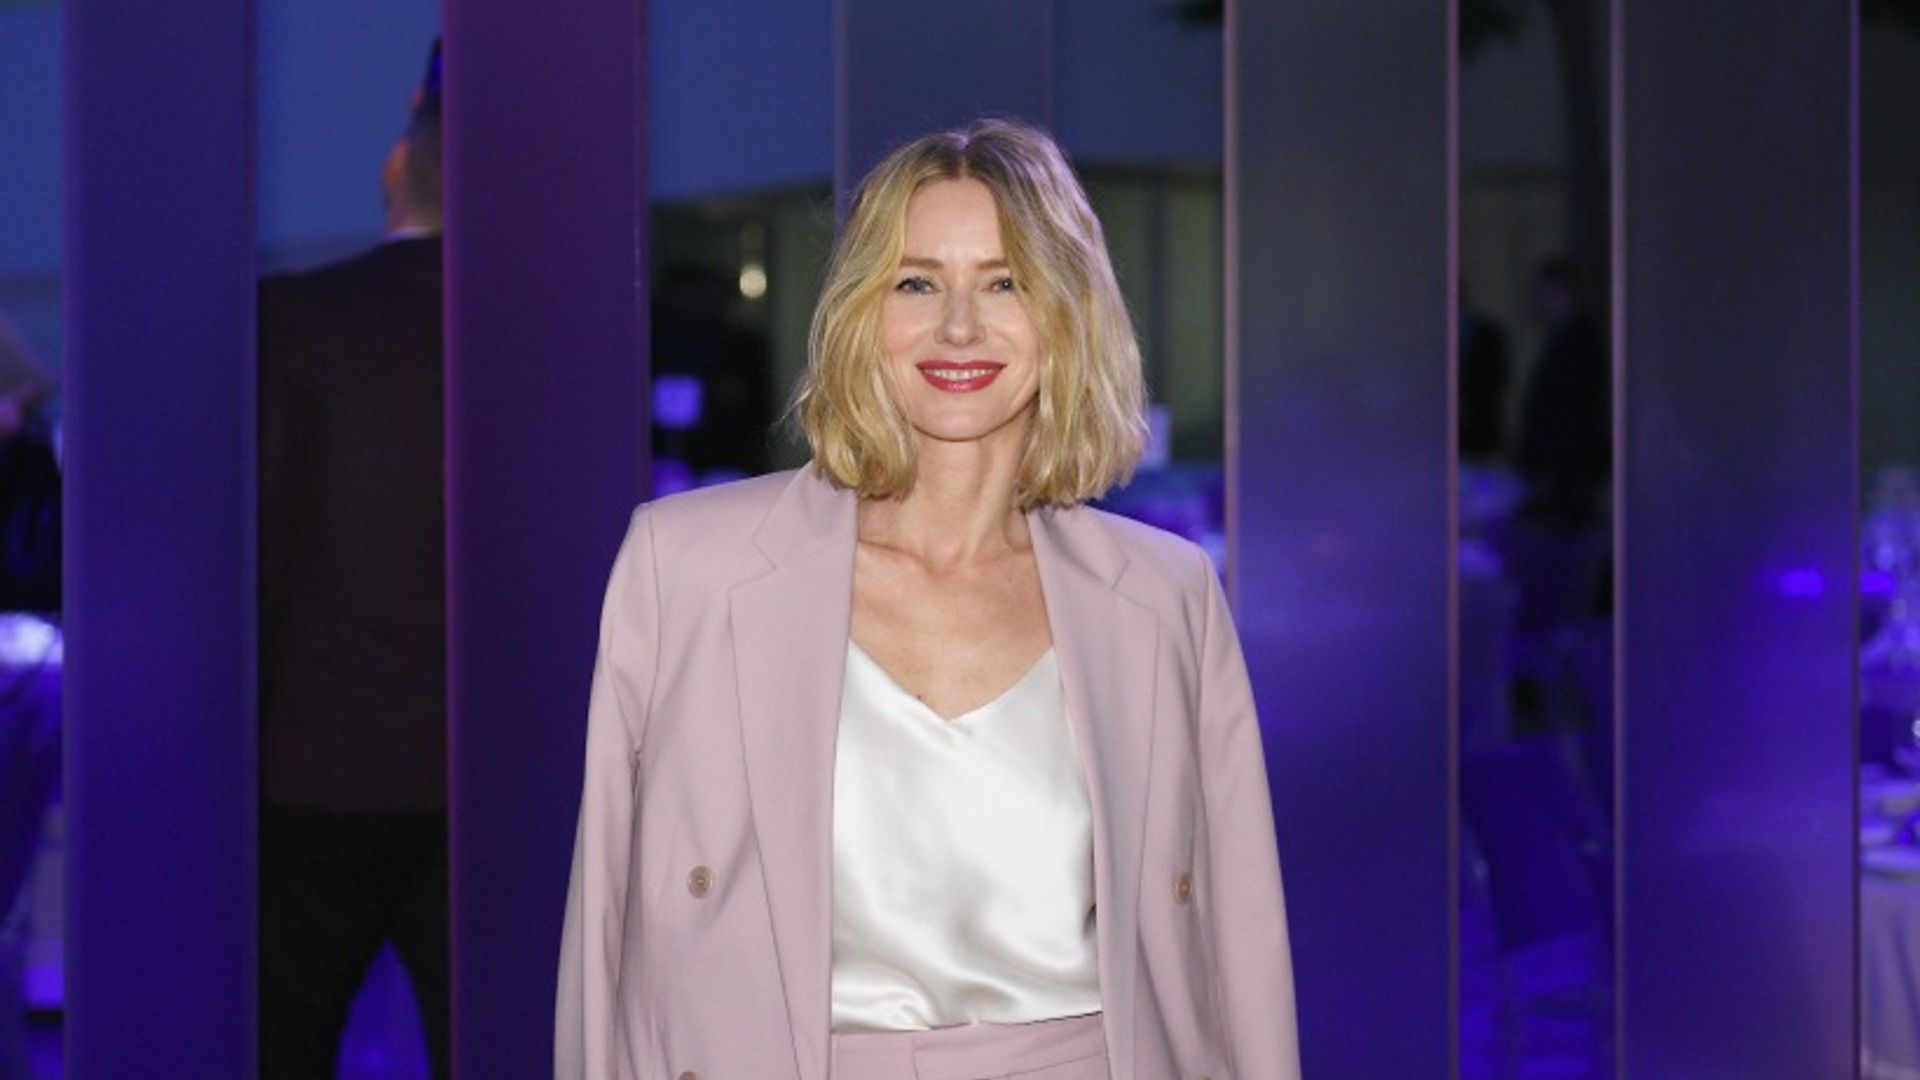 Naomi Watts looks fabulous at 50 in Victoria Beckham-esque lilac suit